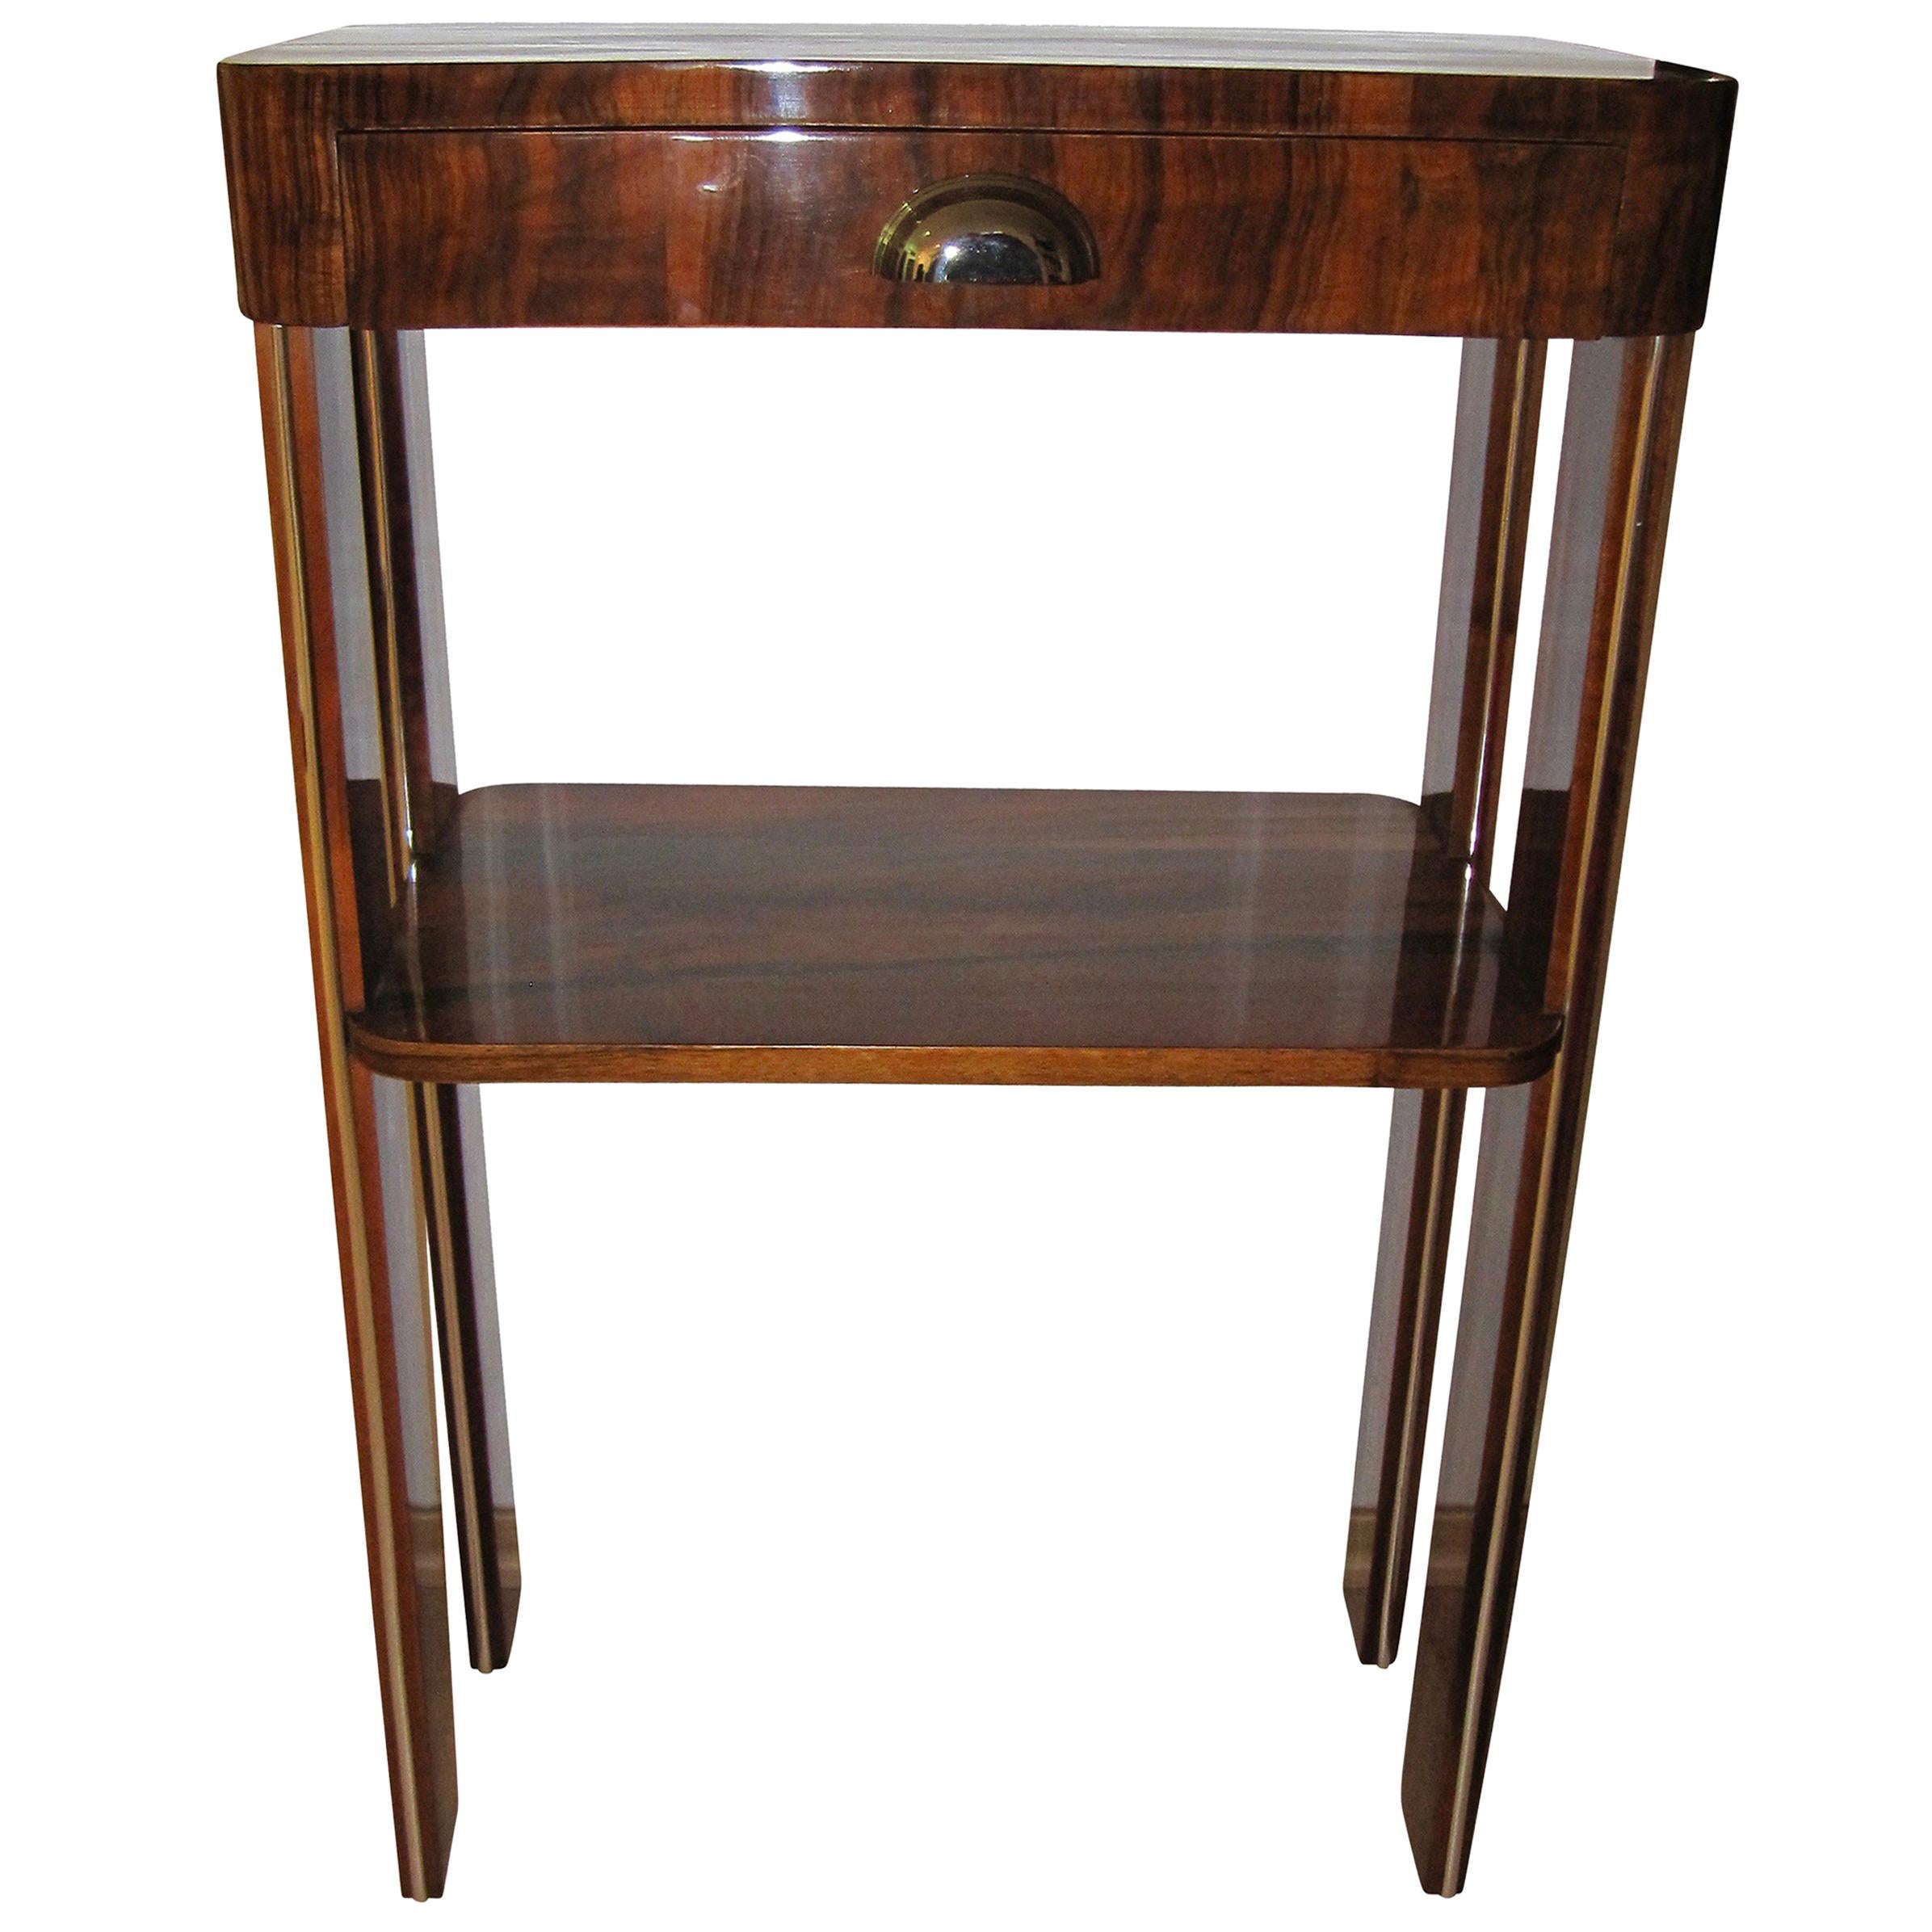 Small Art Deco Console with Drawer, France, circa 1930